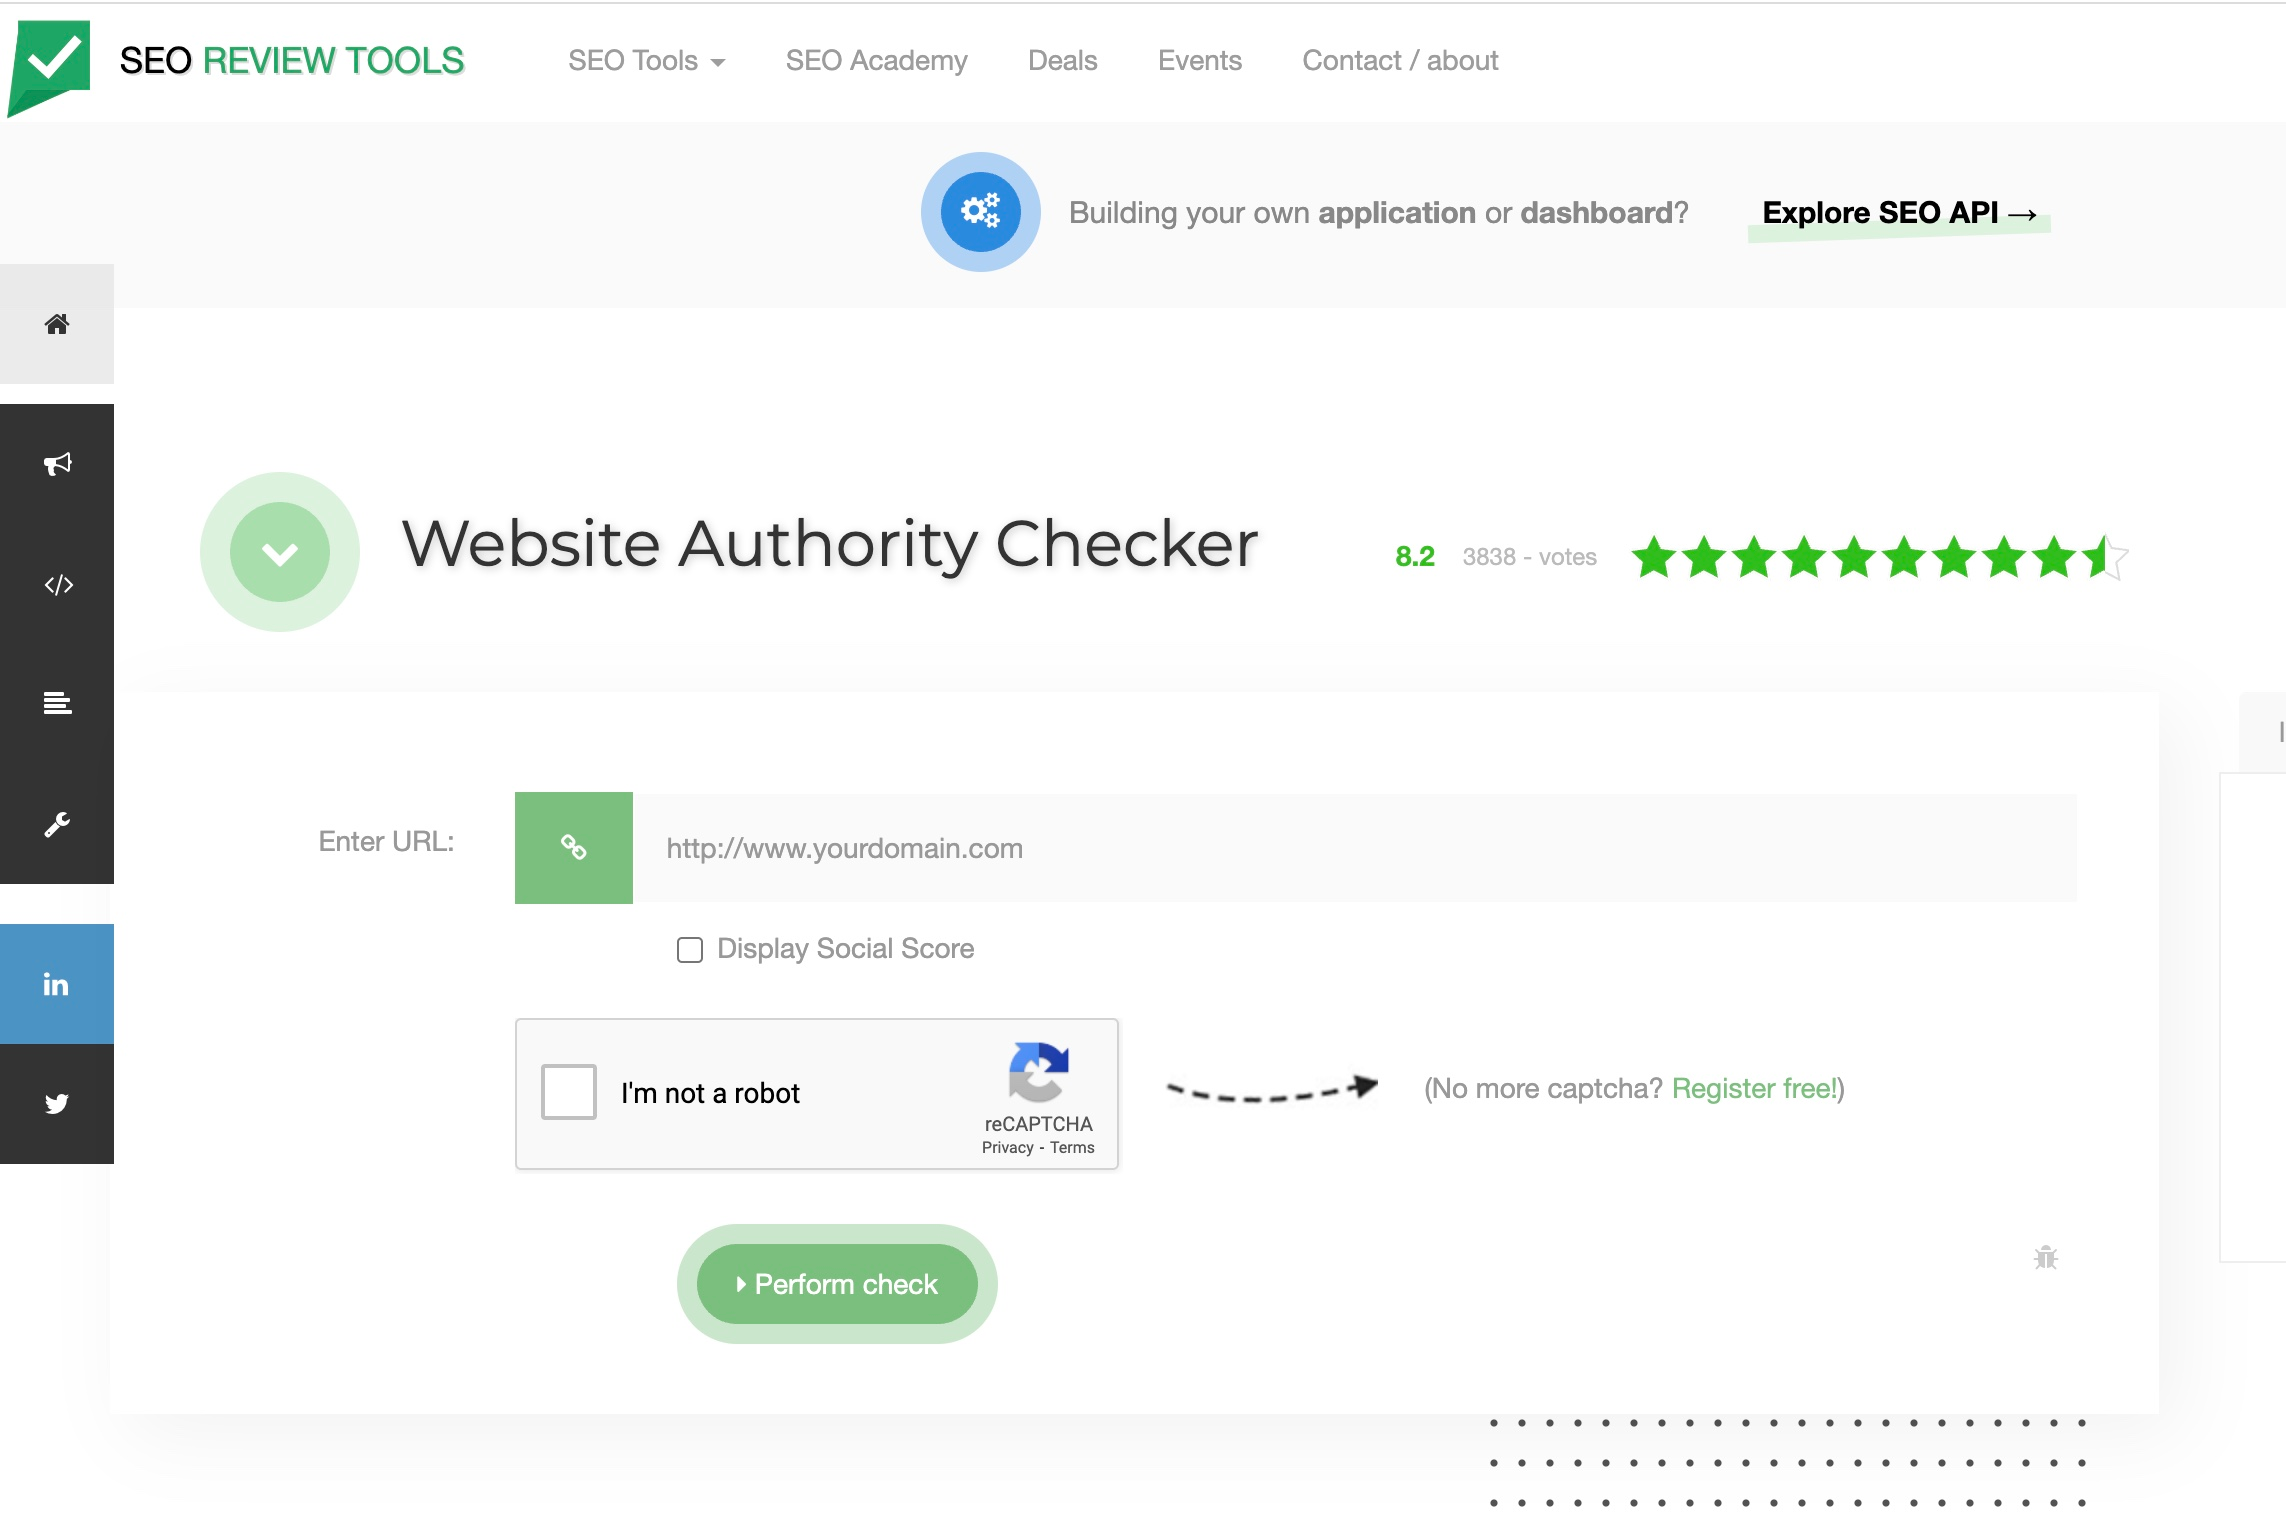 SEO review tools domain authority checker